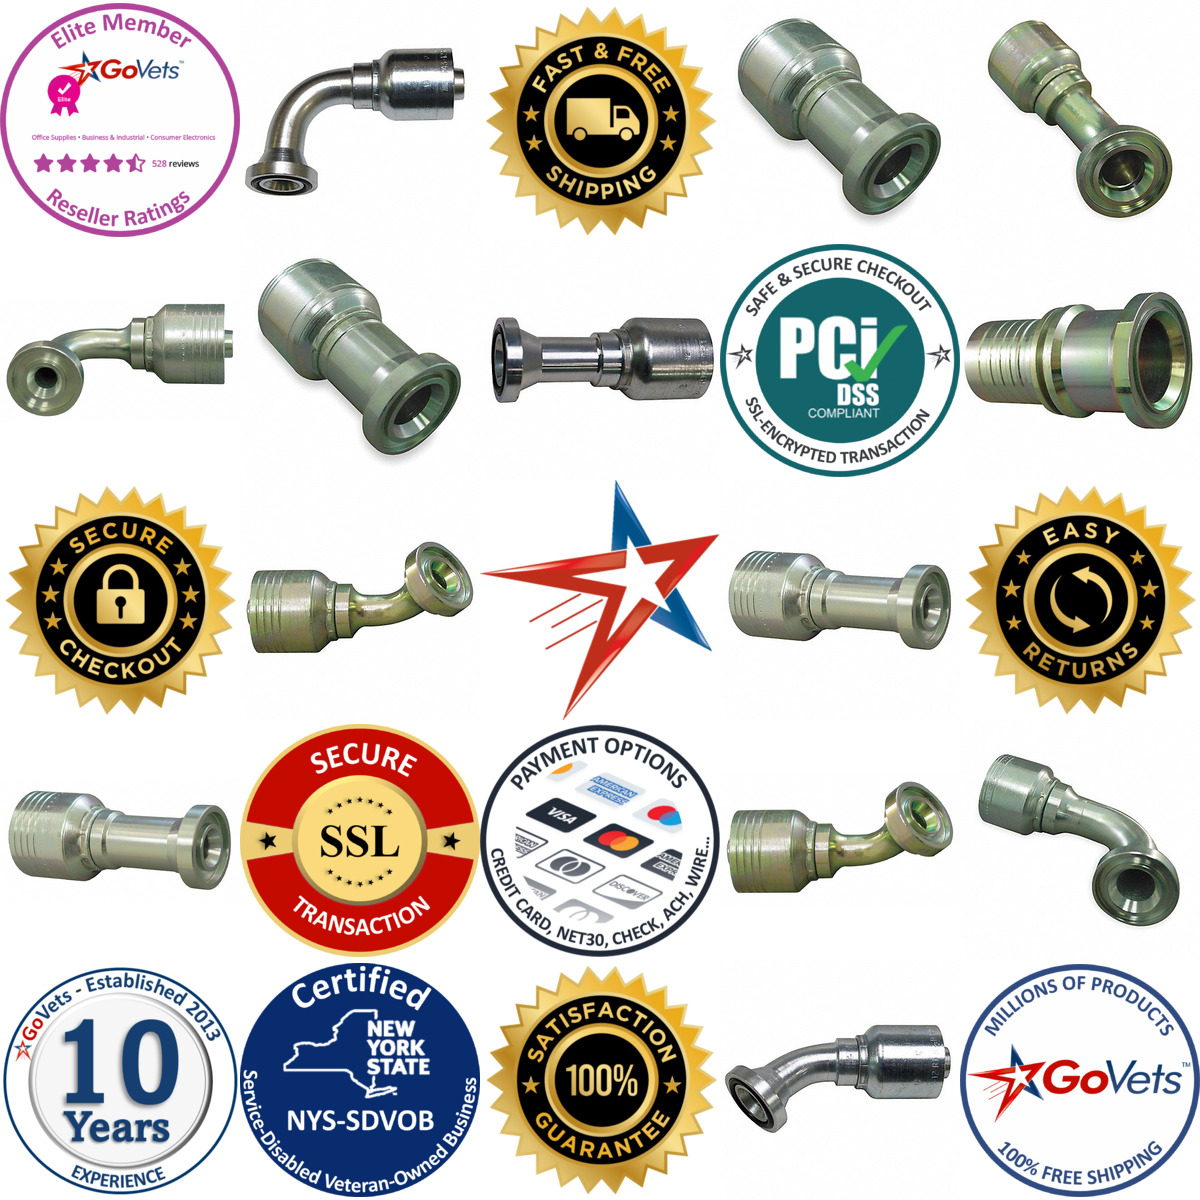 A selection of Hydraulic Flange Fittings products on GoVets